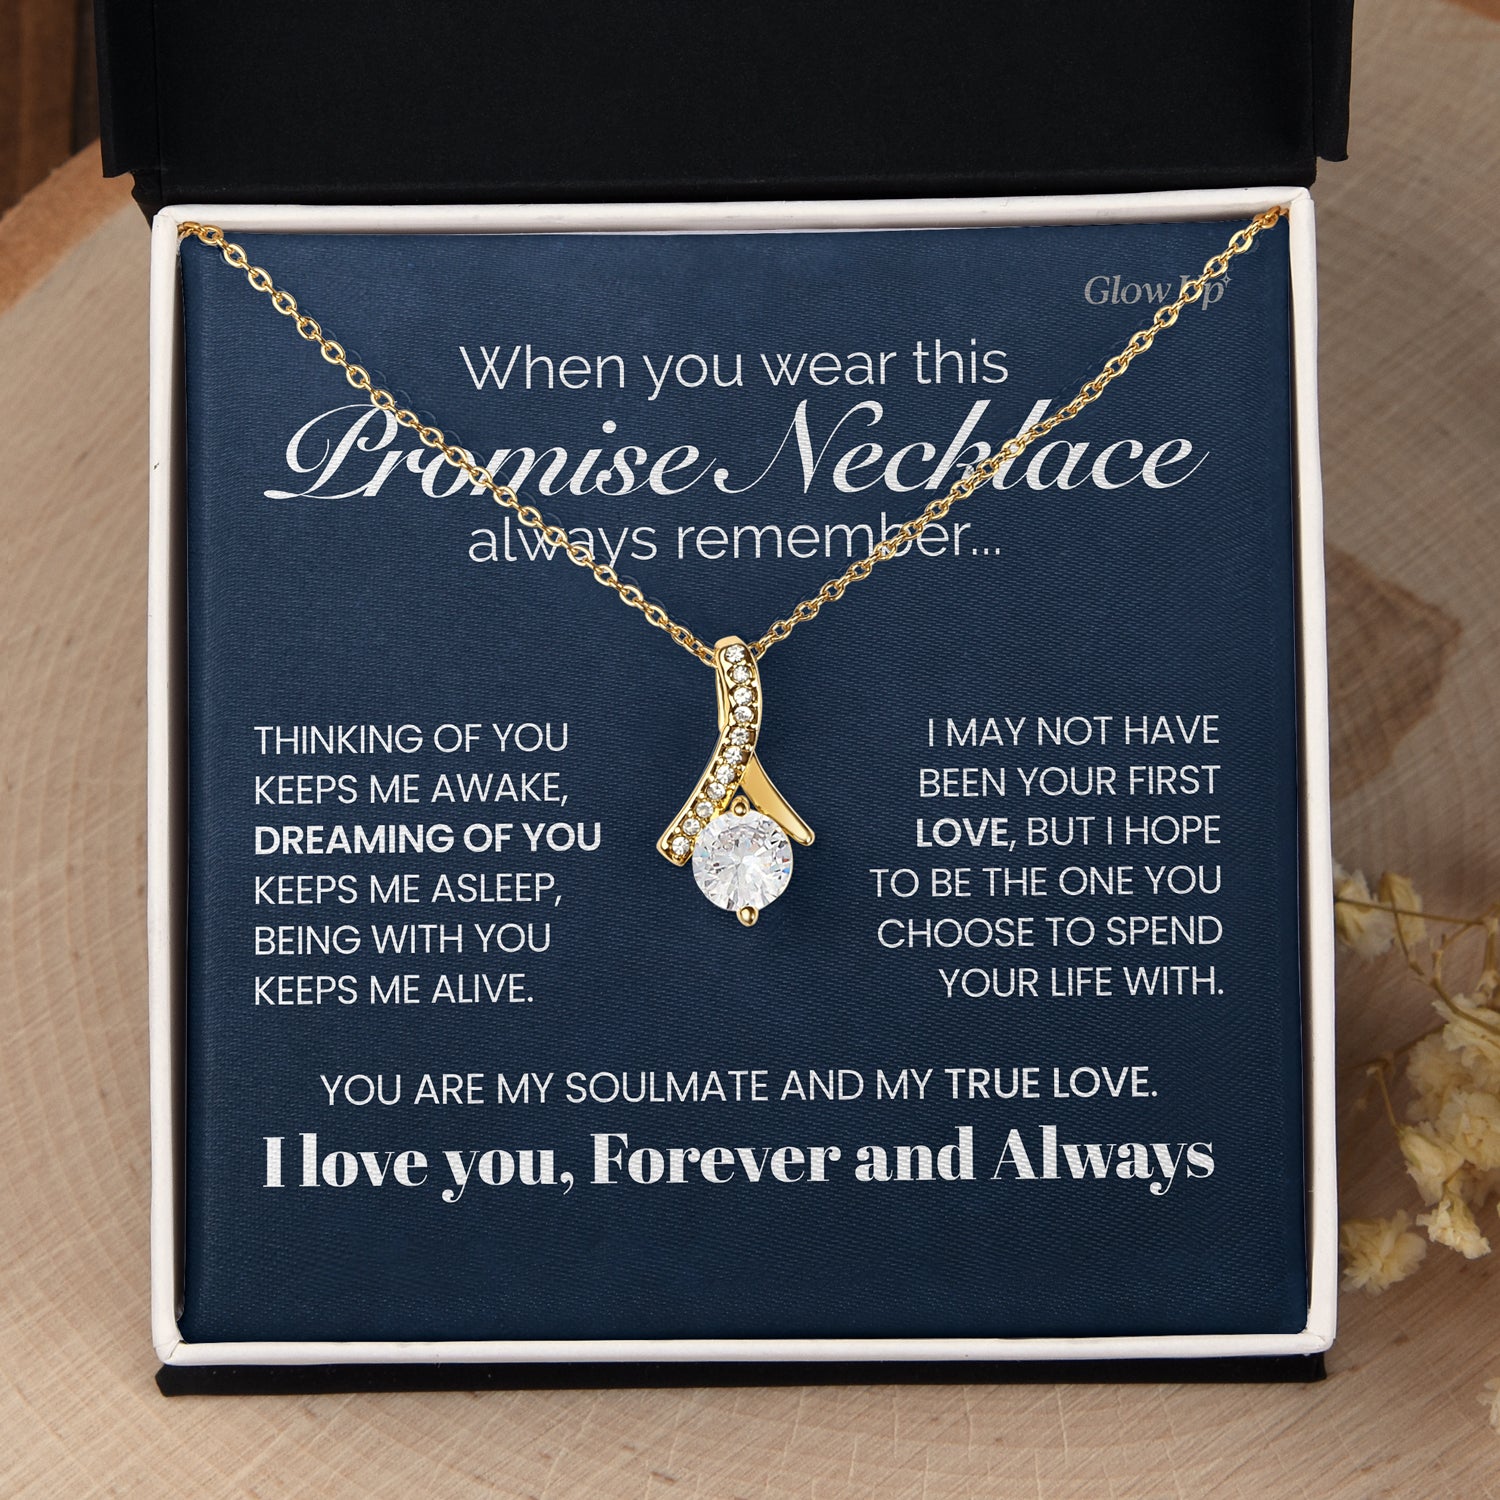 ShineOn Fulfillment Jewelry 18K Yellow Gold Finish / Two-Toned Box Promise Necklace - When You Wear This Always Remember